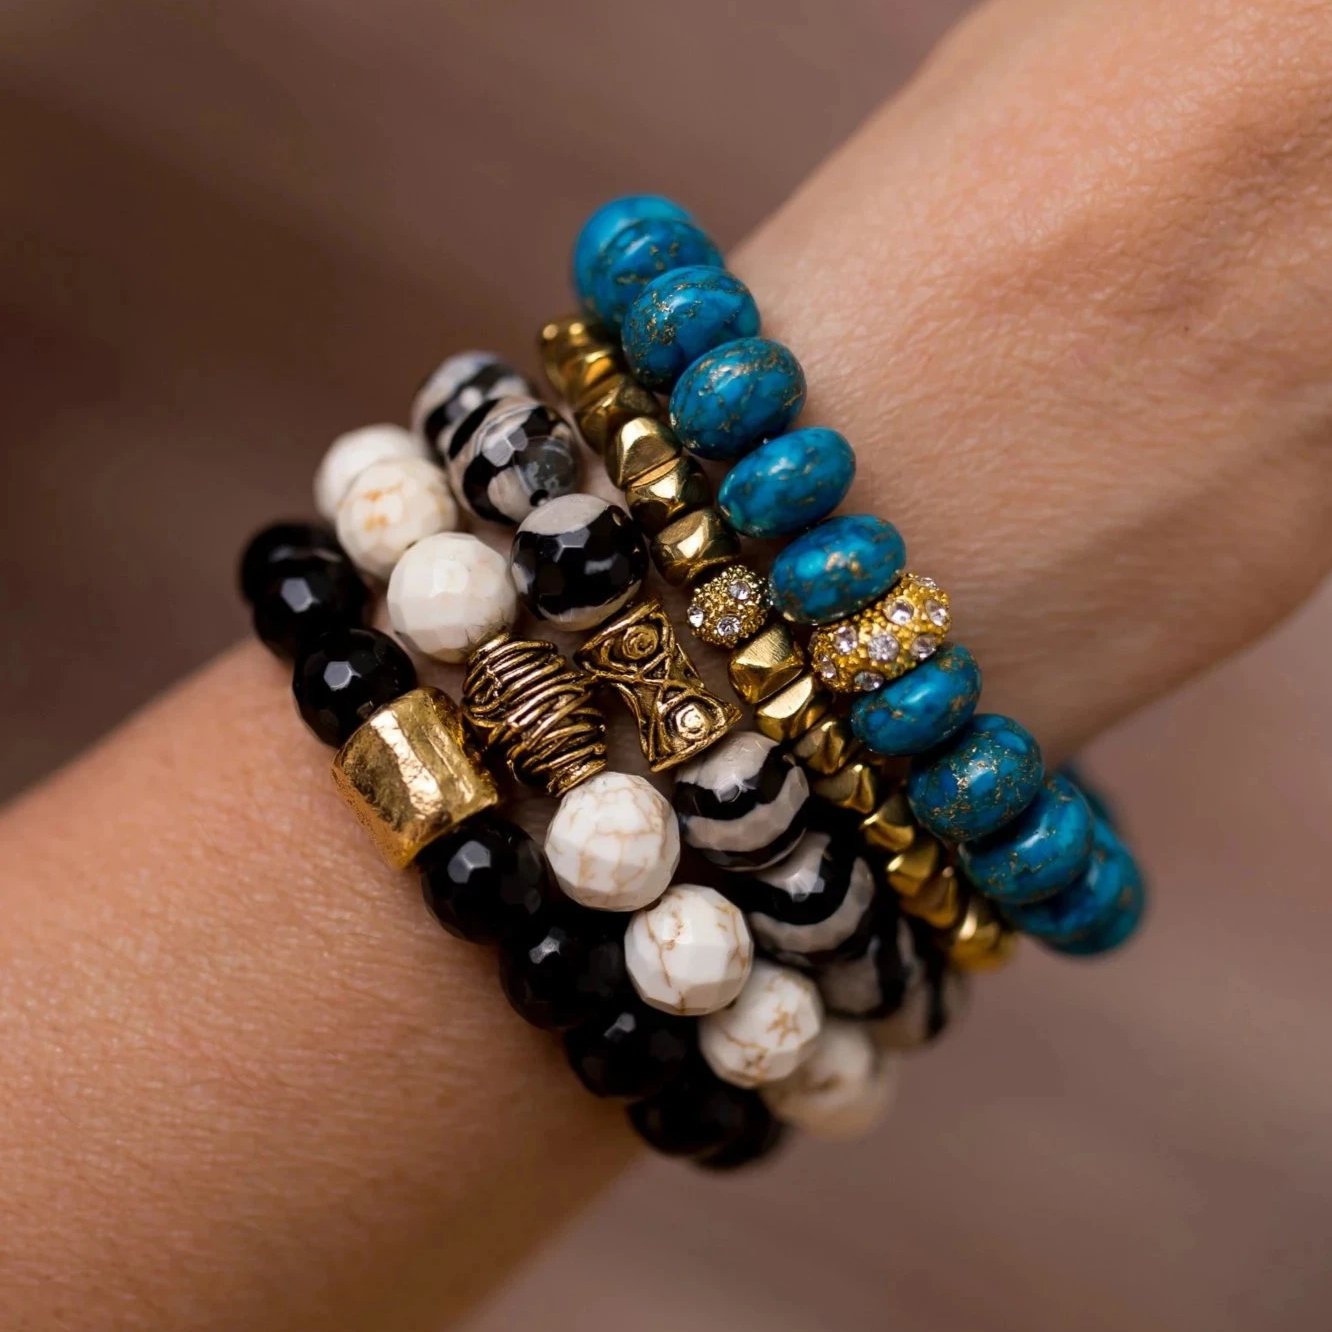 Black and Turquoise Bracelet Stack